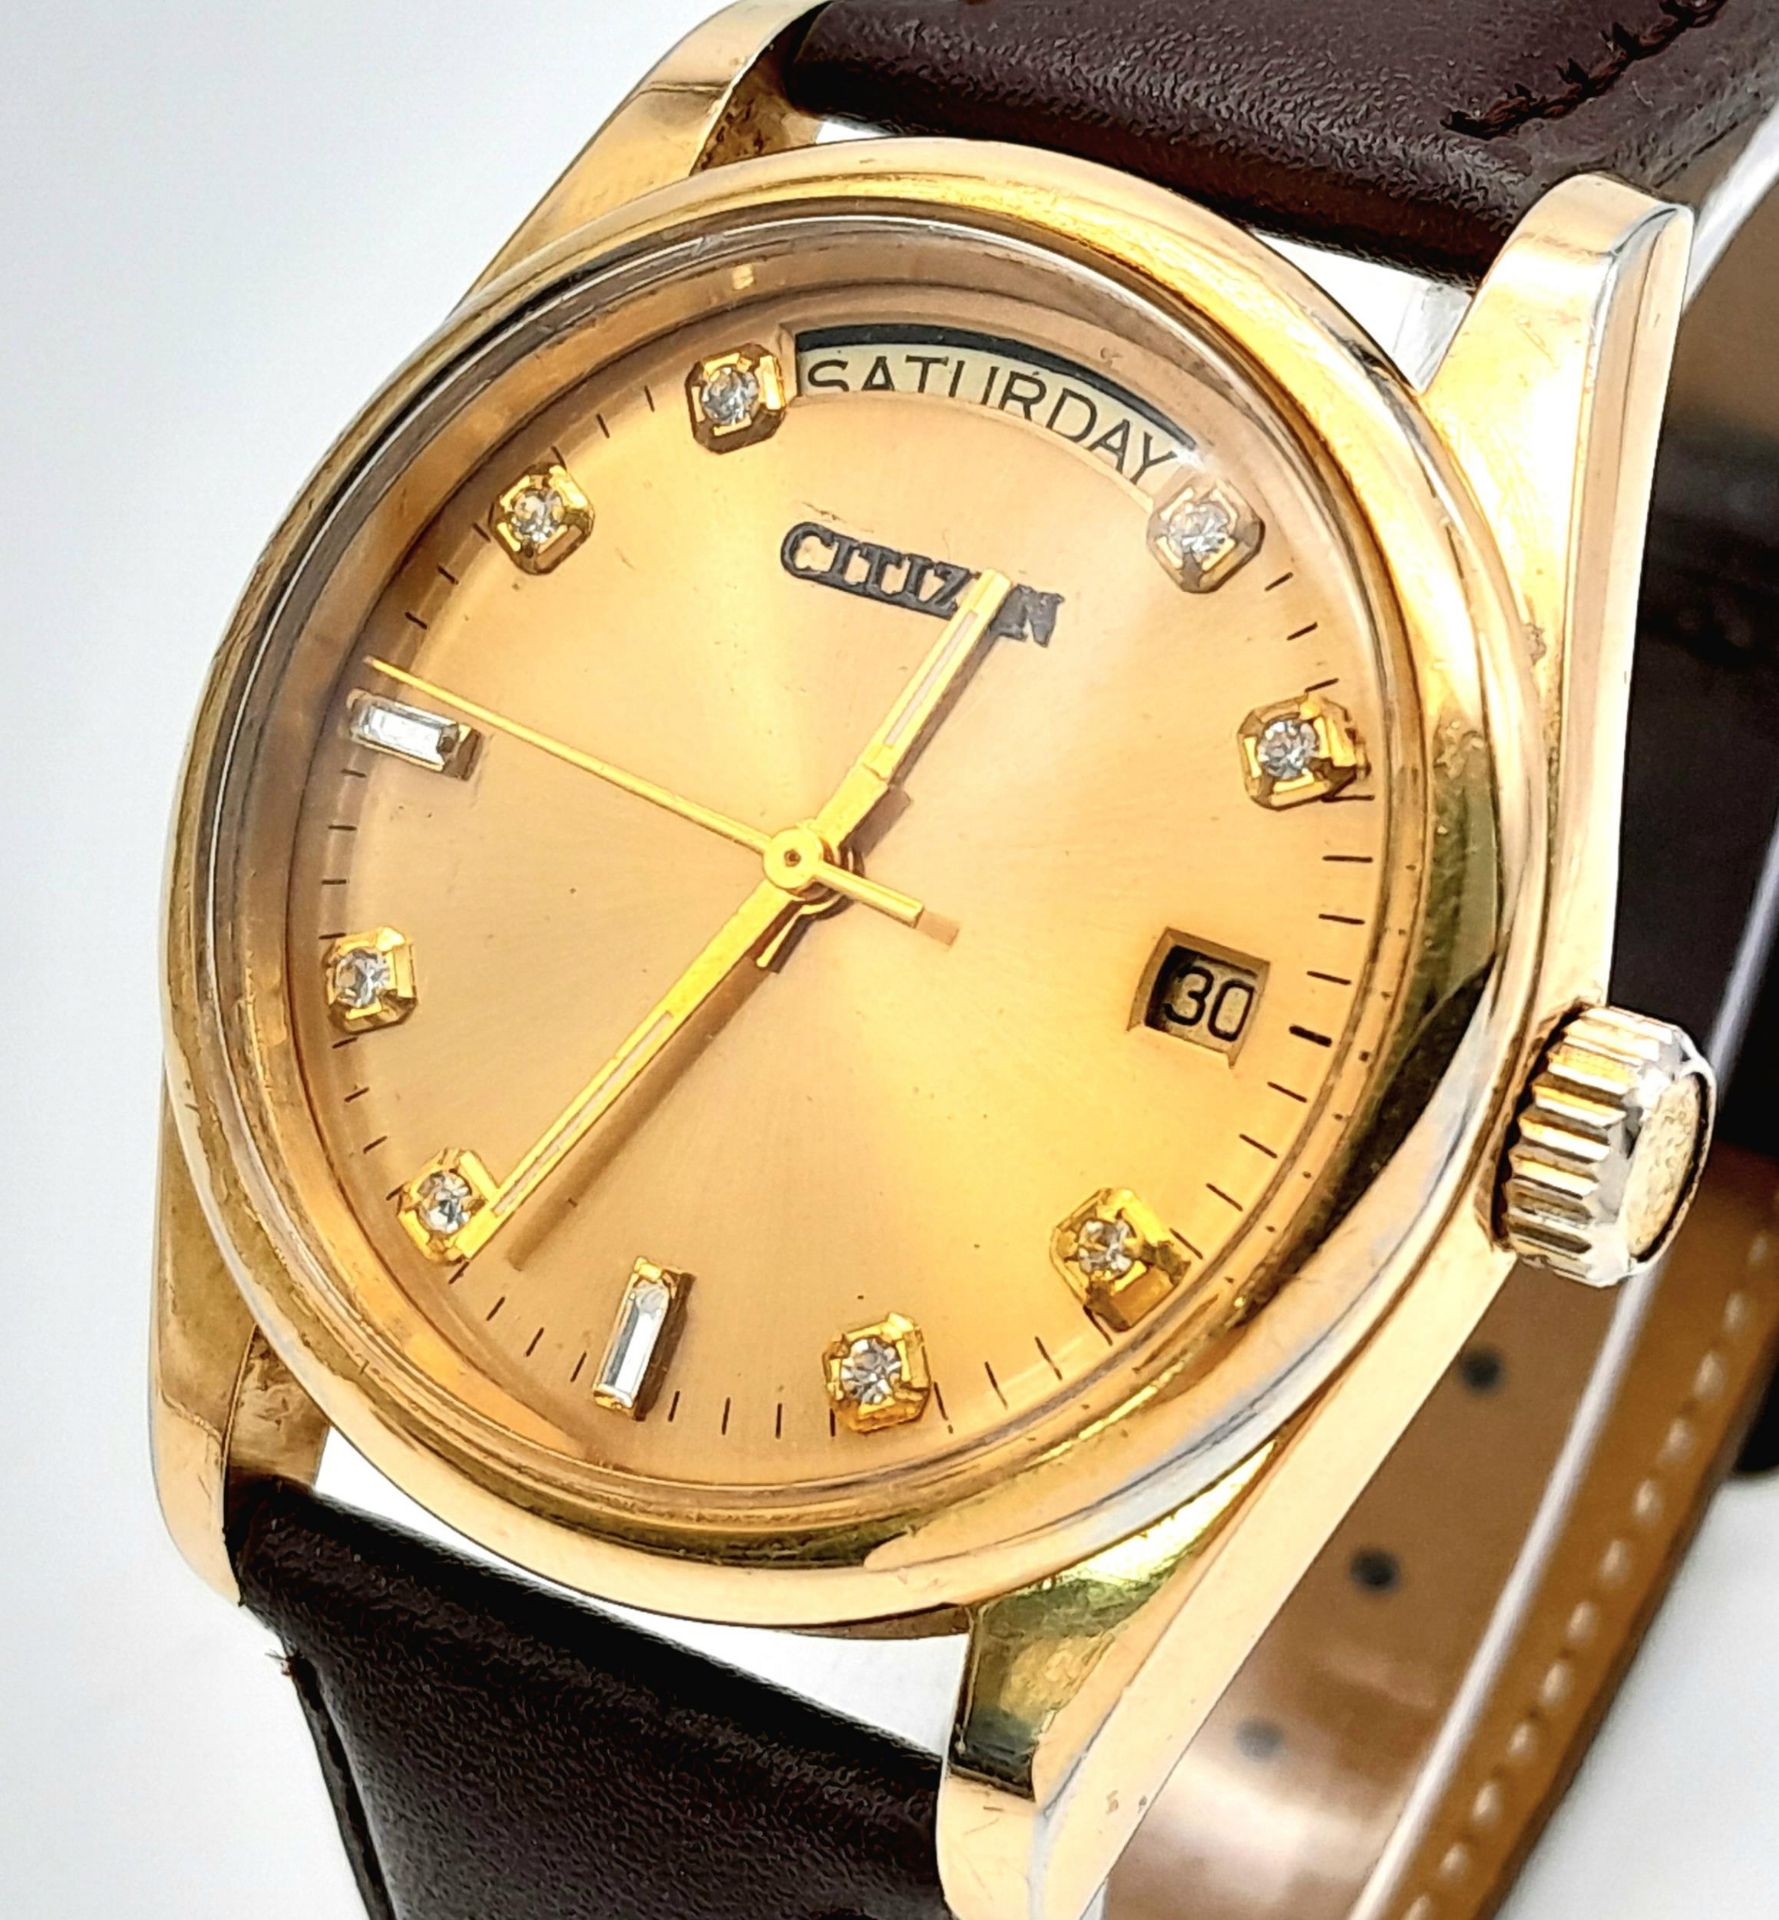 A Citizen Automatic Stone Set Watch. Brown leather strap. Gold plated case - 36mm. Gold tone dial - Image 2 of 6